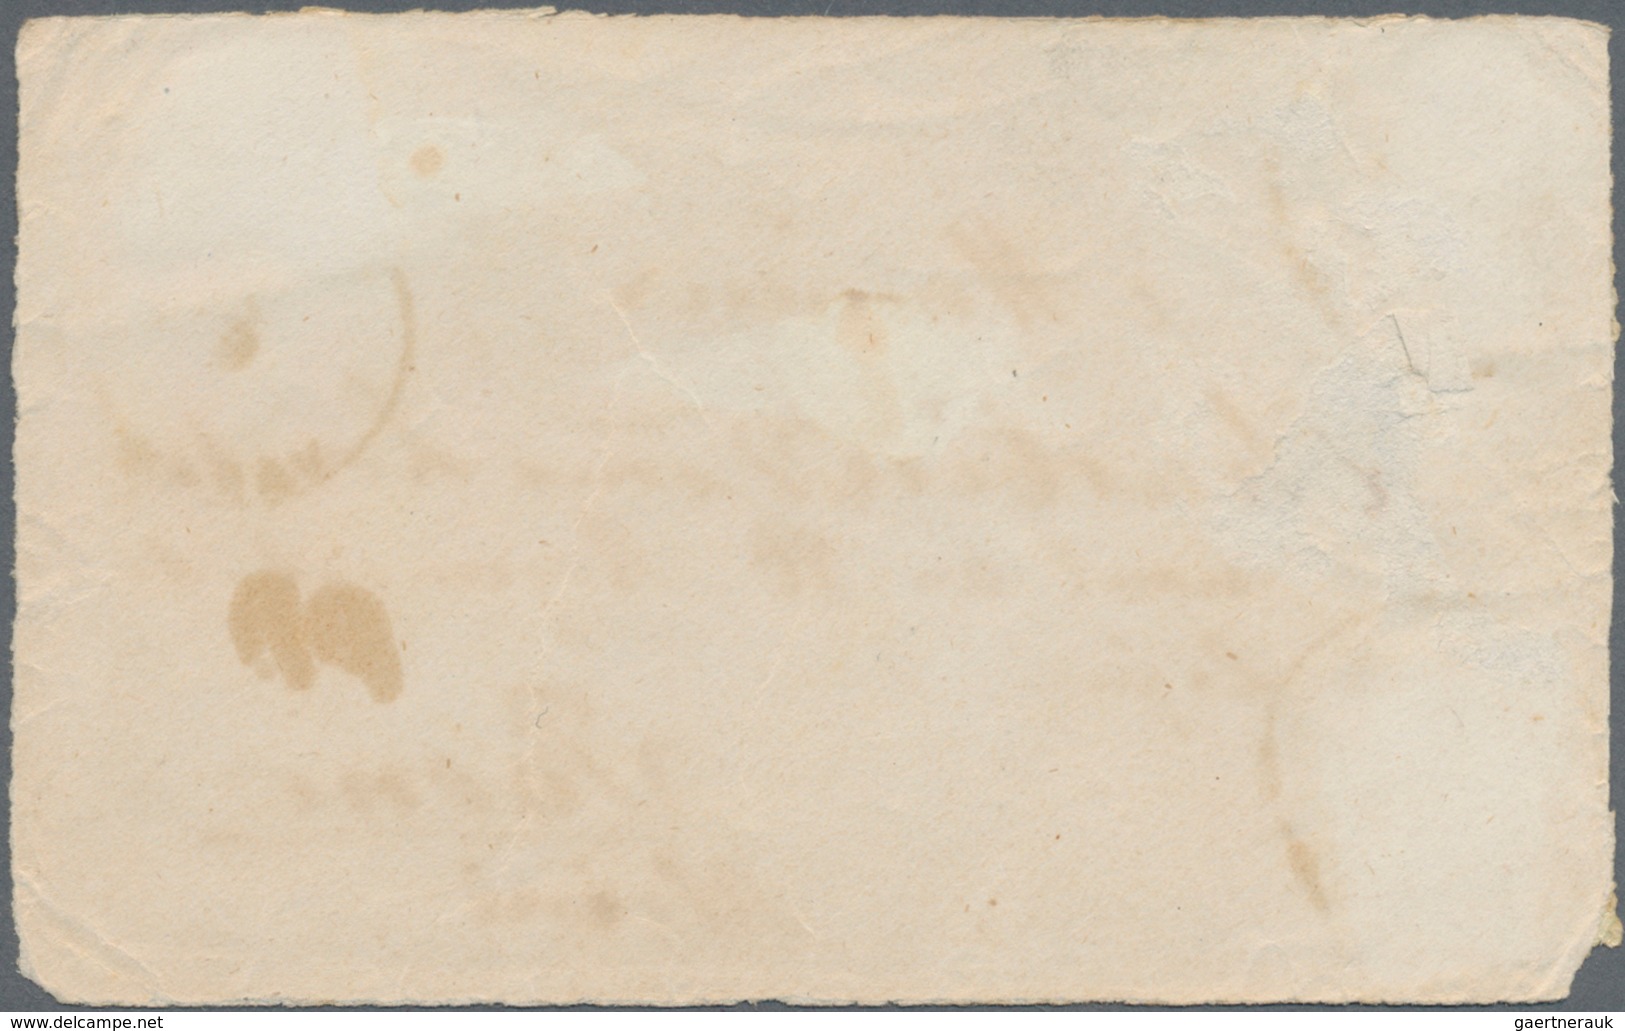 Ungarn: 1872, Destination Algeria: 5kr. Red And 10kr. Blue (2) On Front Of Cover From "ARAD 11/4" To - Gebraucht